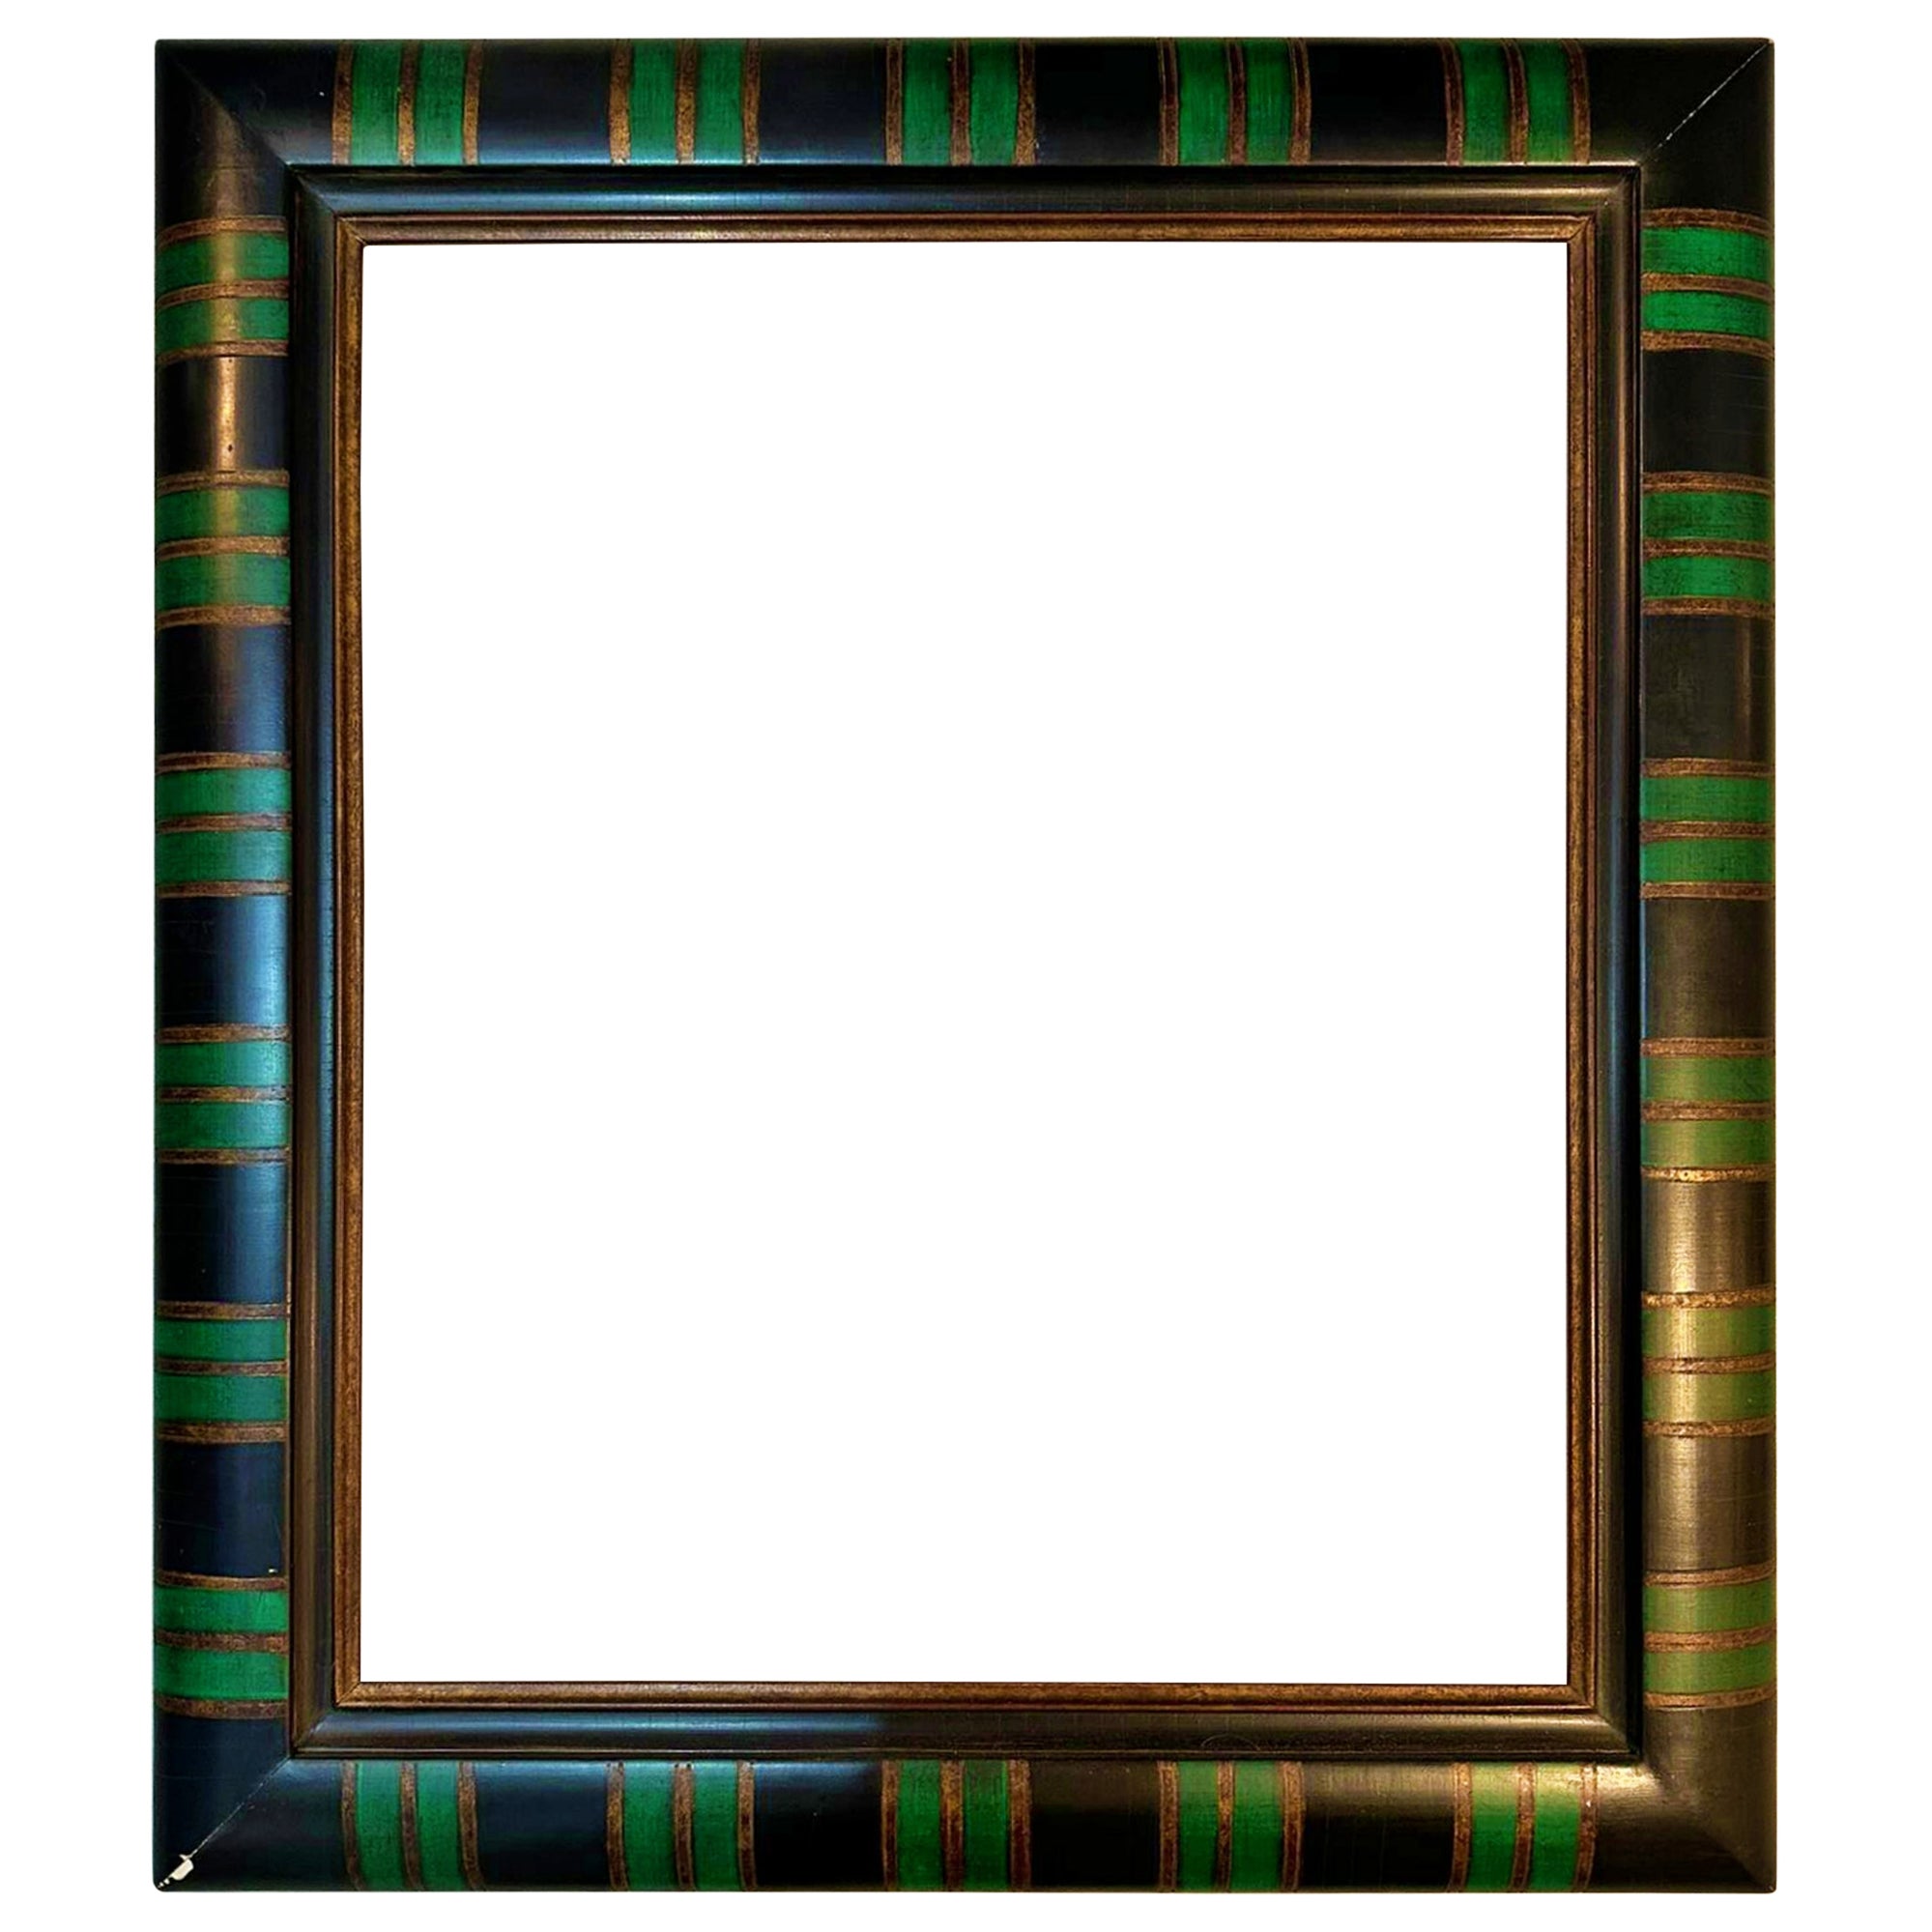 Frame by the French Manufactory "Delf, Cadre D' Art, Paris", 20th Century